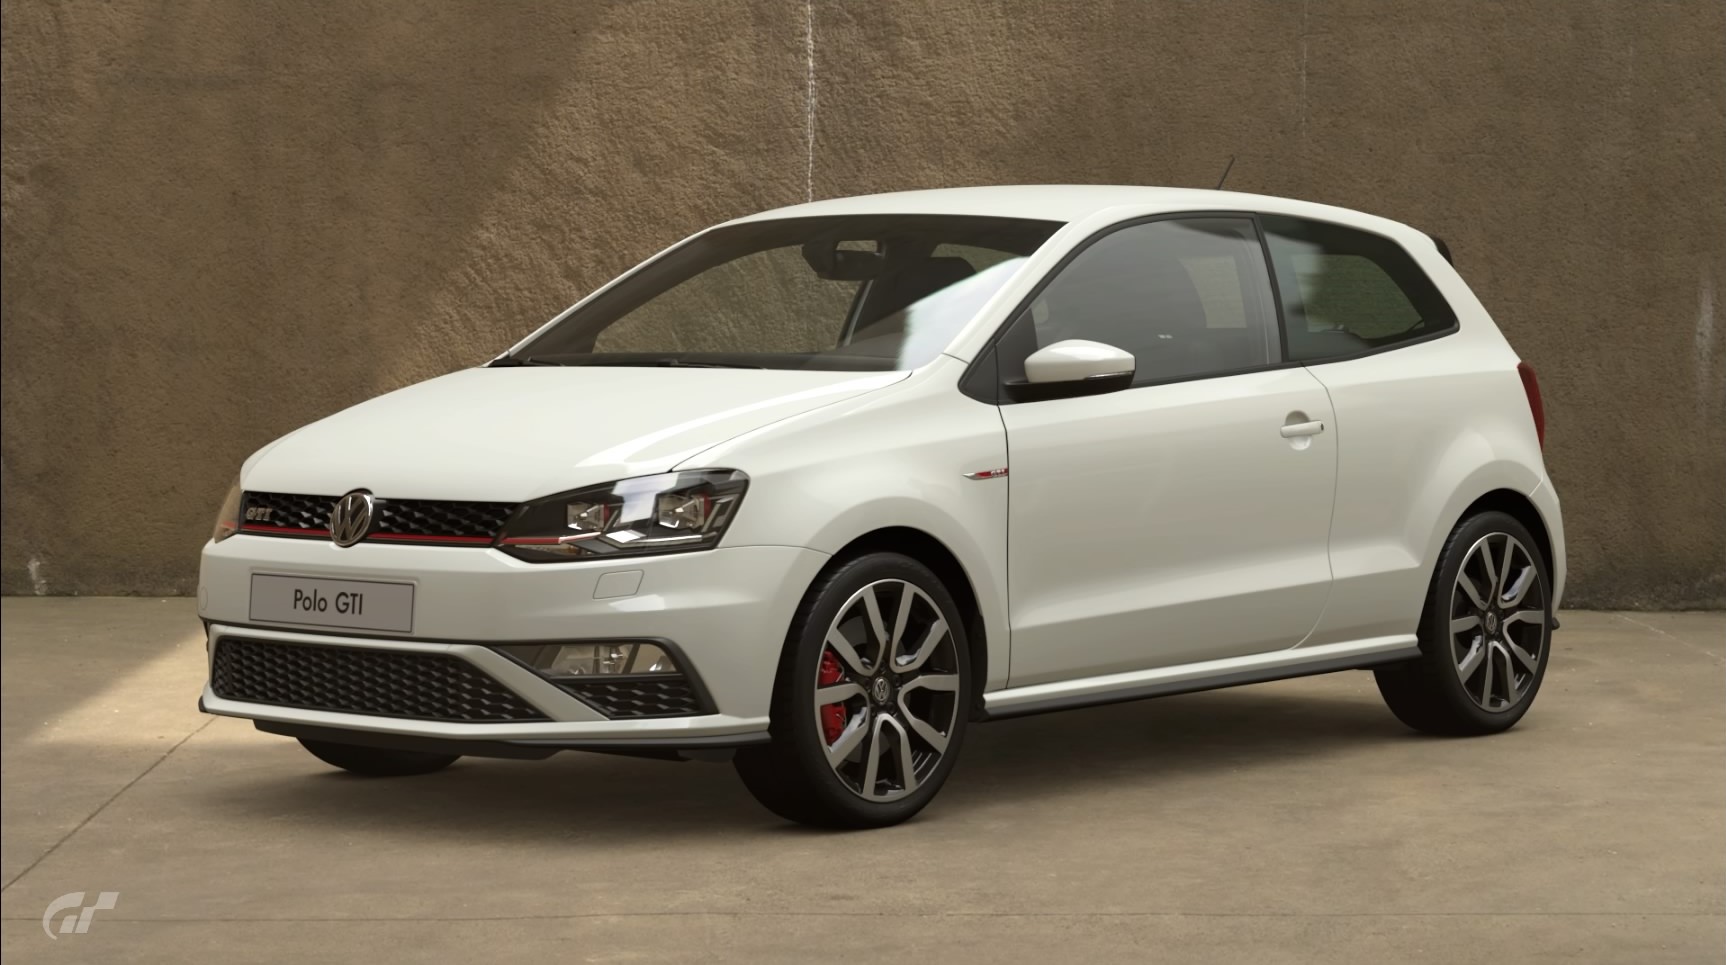 https://static.wikia.nocookie.net/gran-turismo/images/5/5c/Volkswagen_Polo_GTI_%2714.jpg/revision/latest?cb=20220404054122